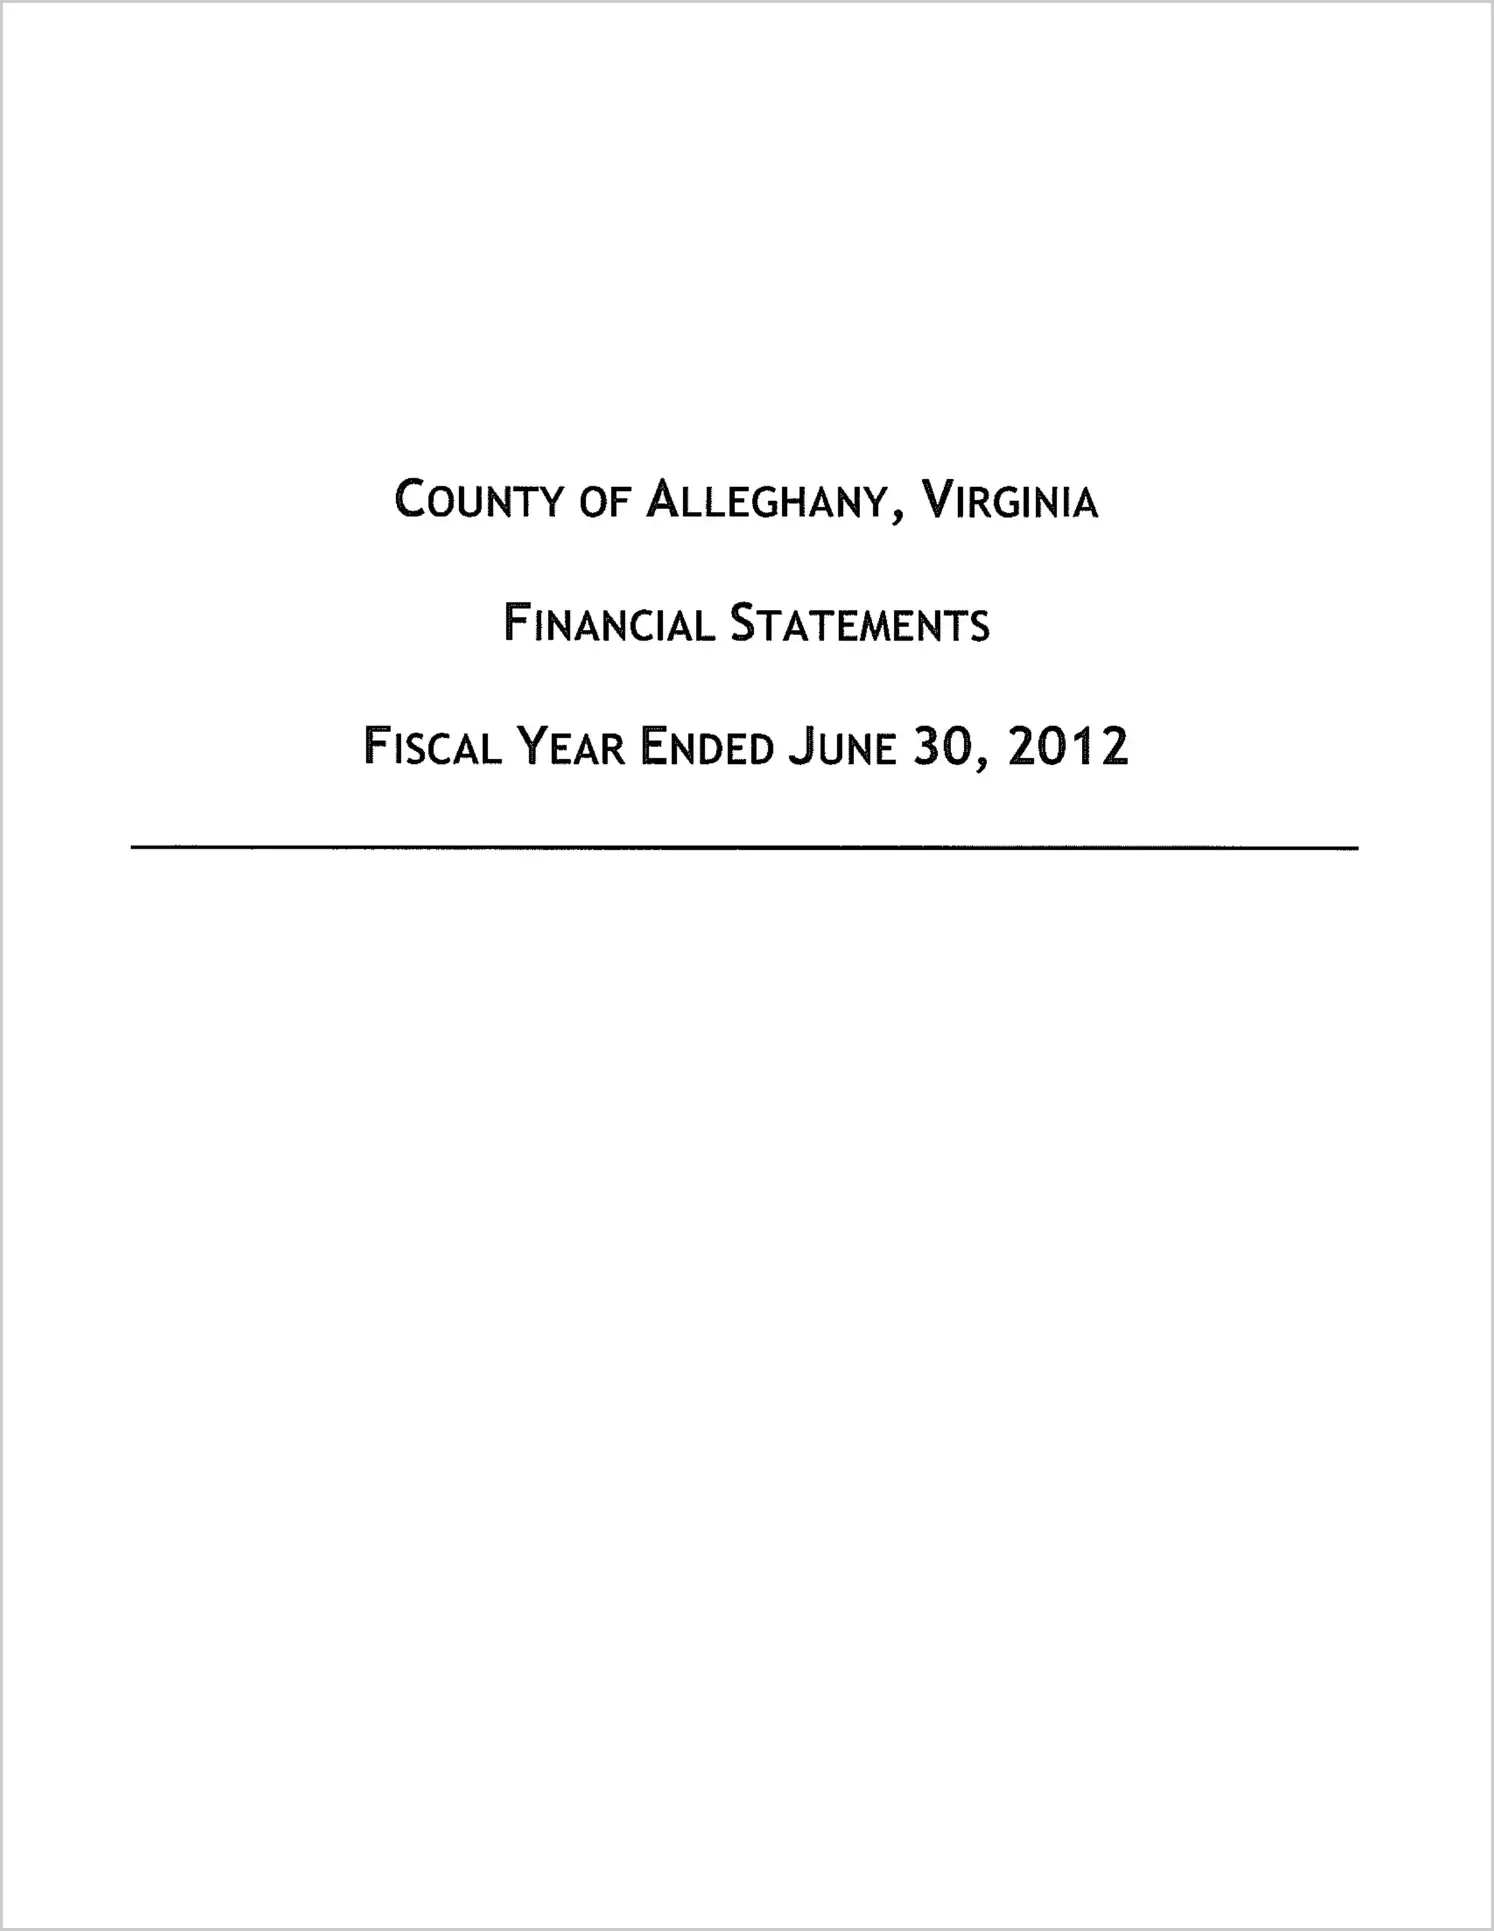 2012 Annual Financial Report for County of Alleghany